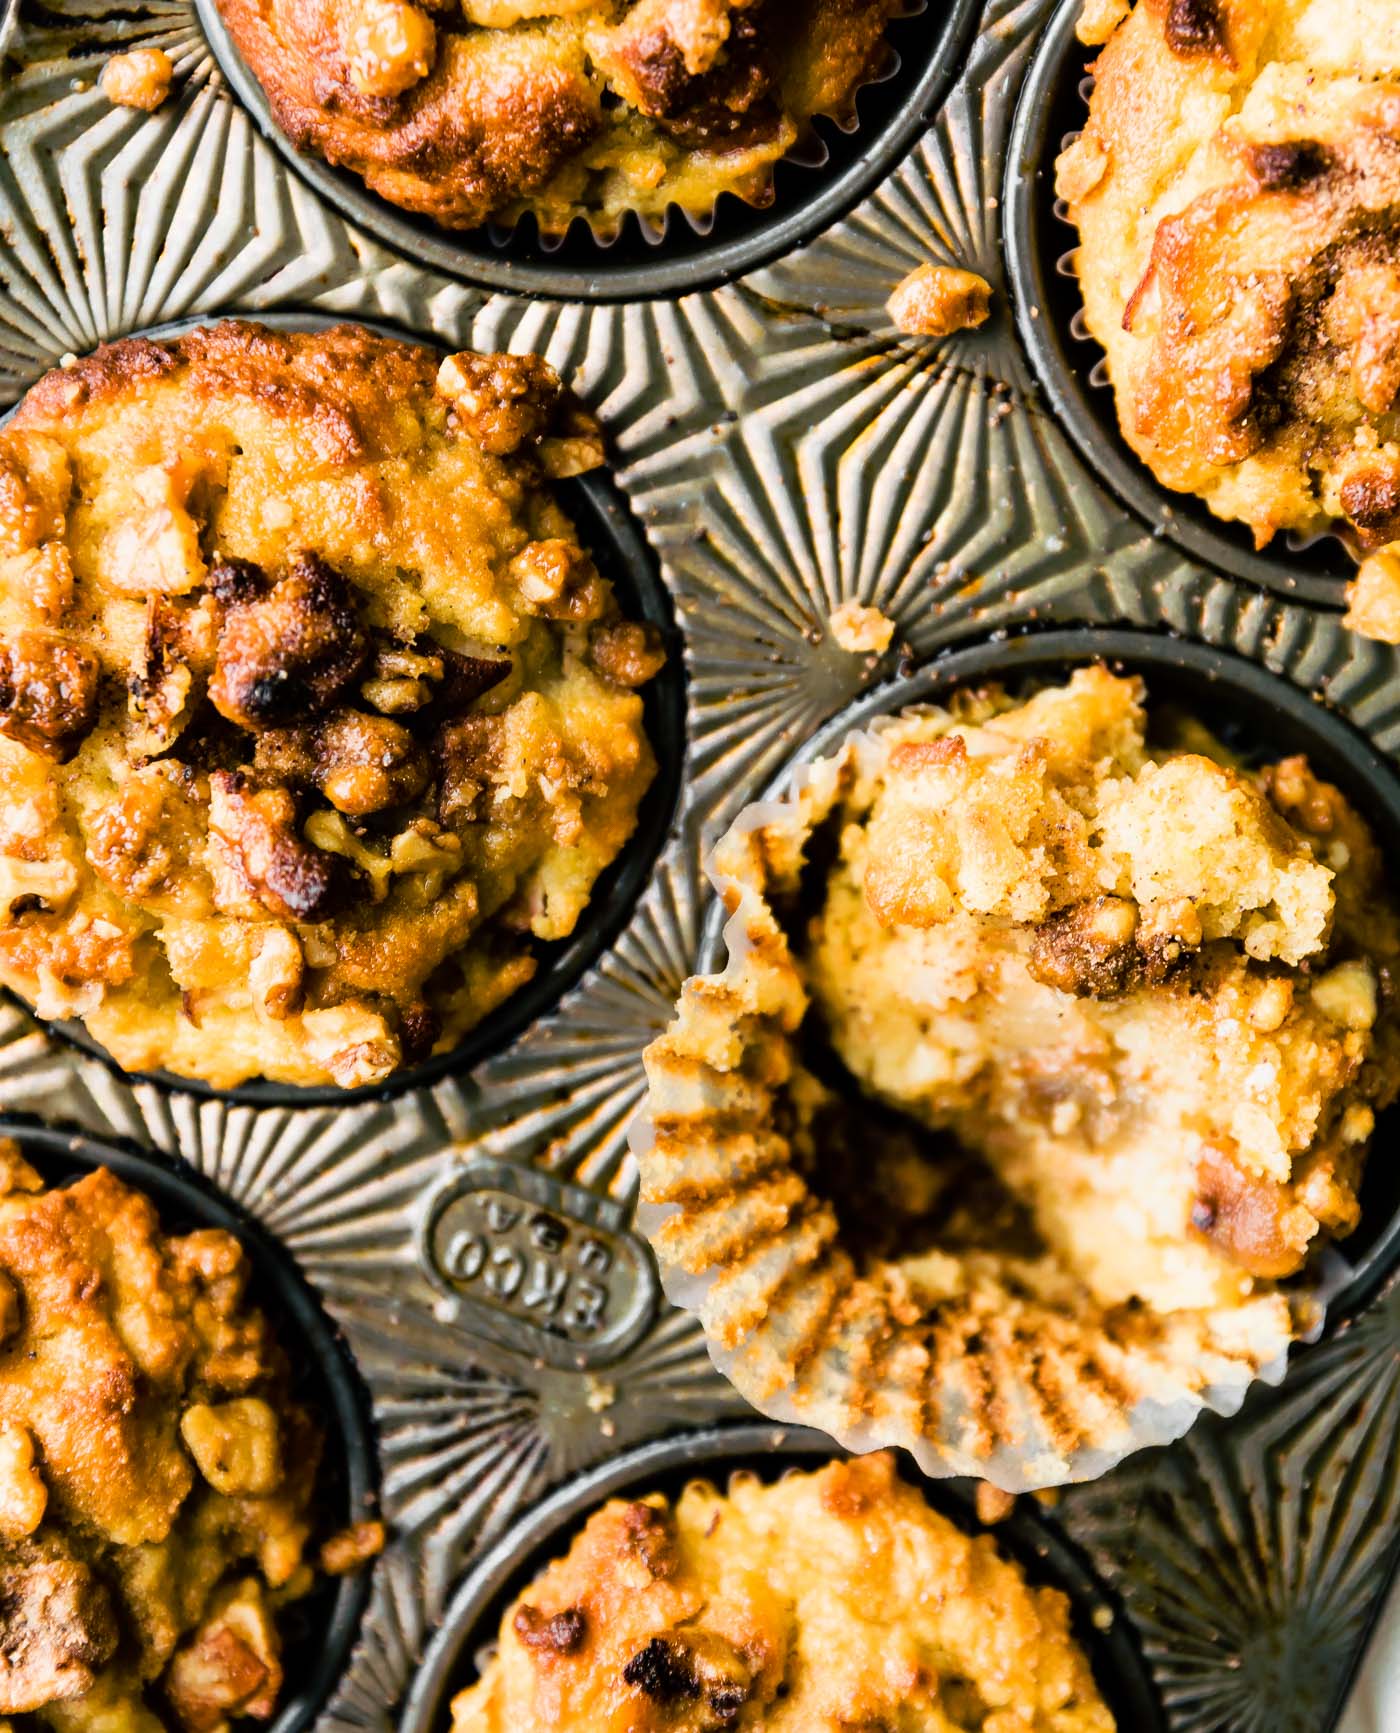 Overhead view muffin tin with spiced pear muffins with nut toppings. One muffin with bite taken out placed sideways in tin to show inside texture.